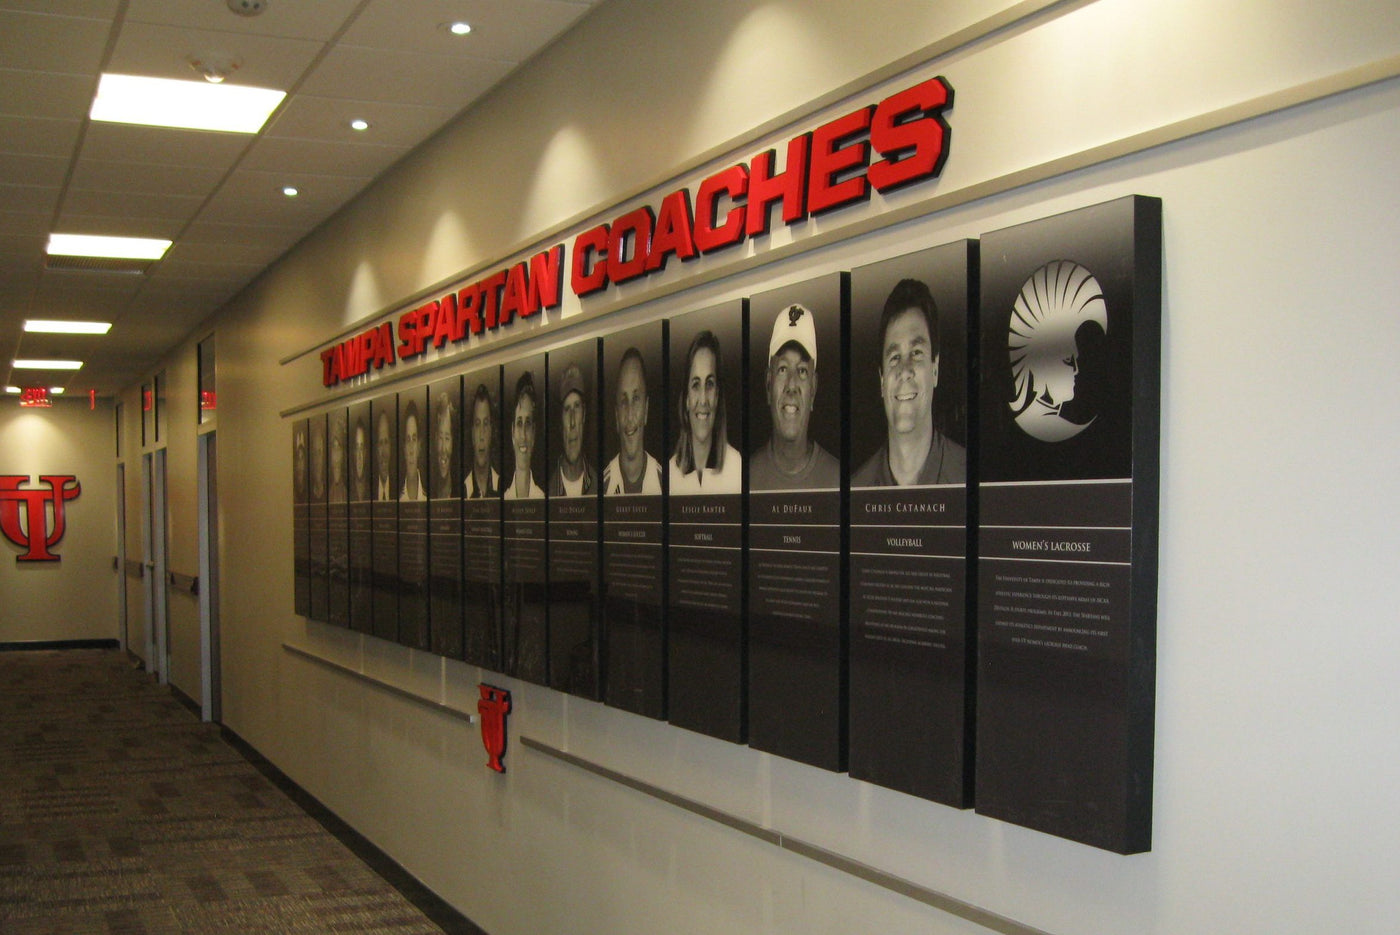 Interior dimensional signage for colleges such as university of tampa